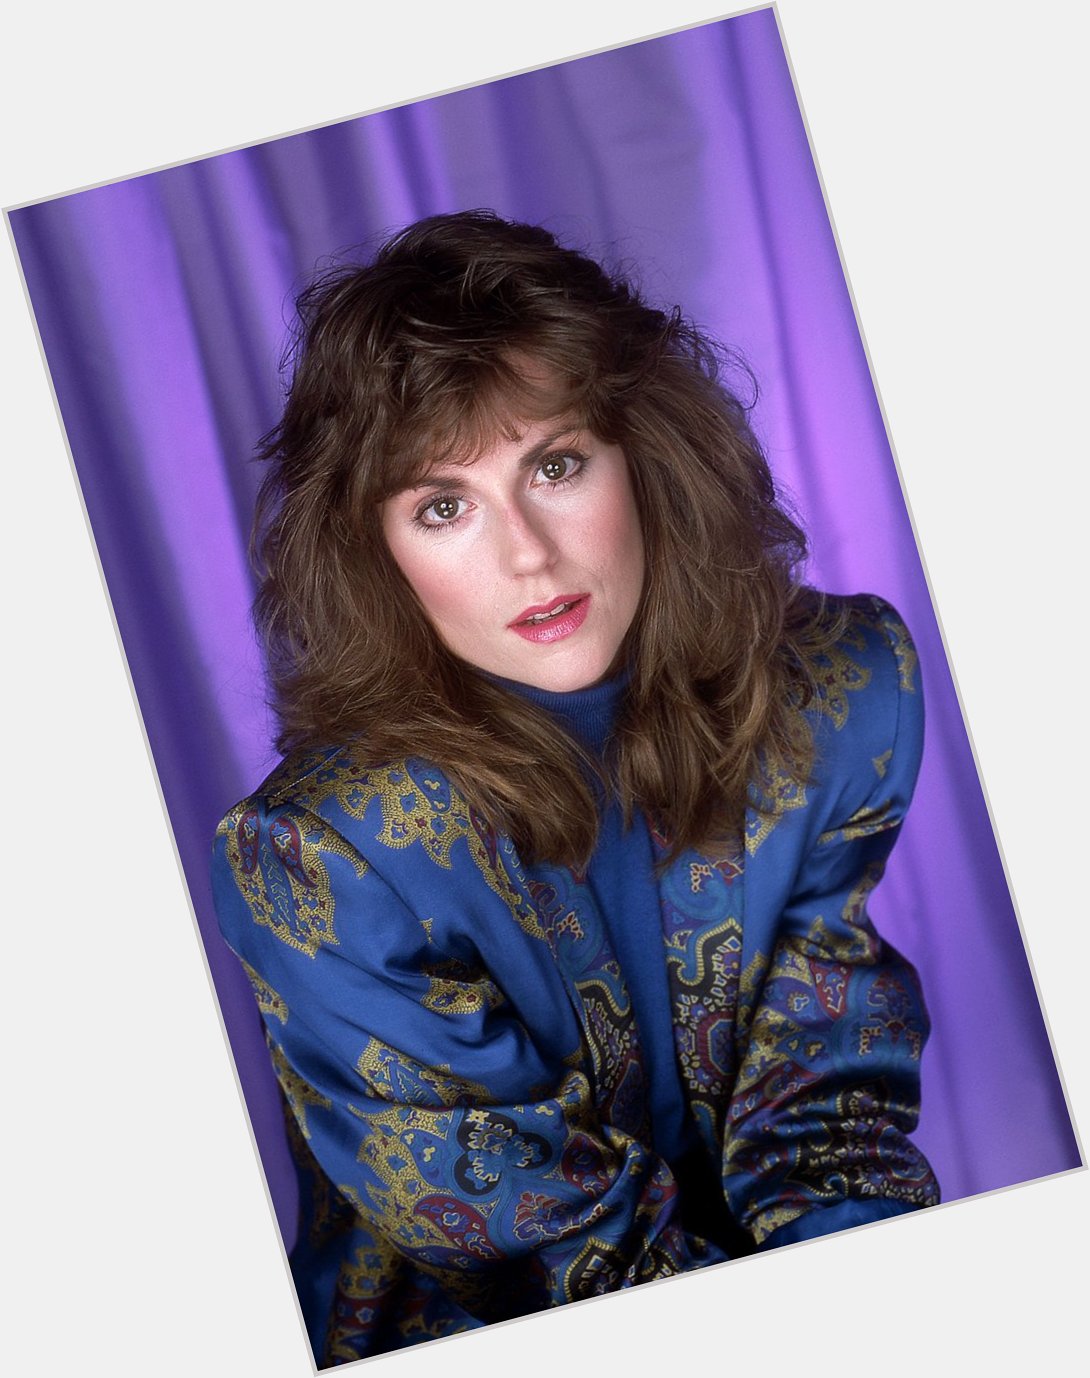 Megan Mullally s 1980s head shots are honestly national treasures. Happy 63rd birthday to this legend! 